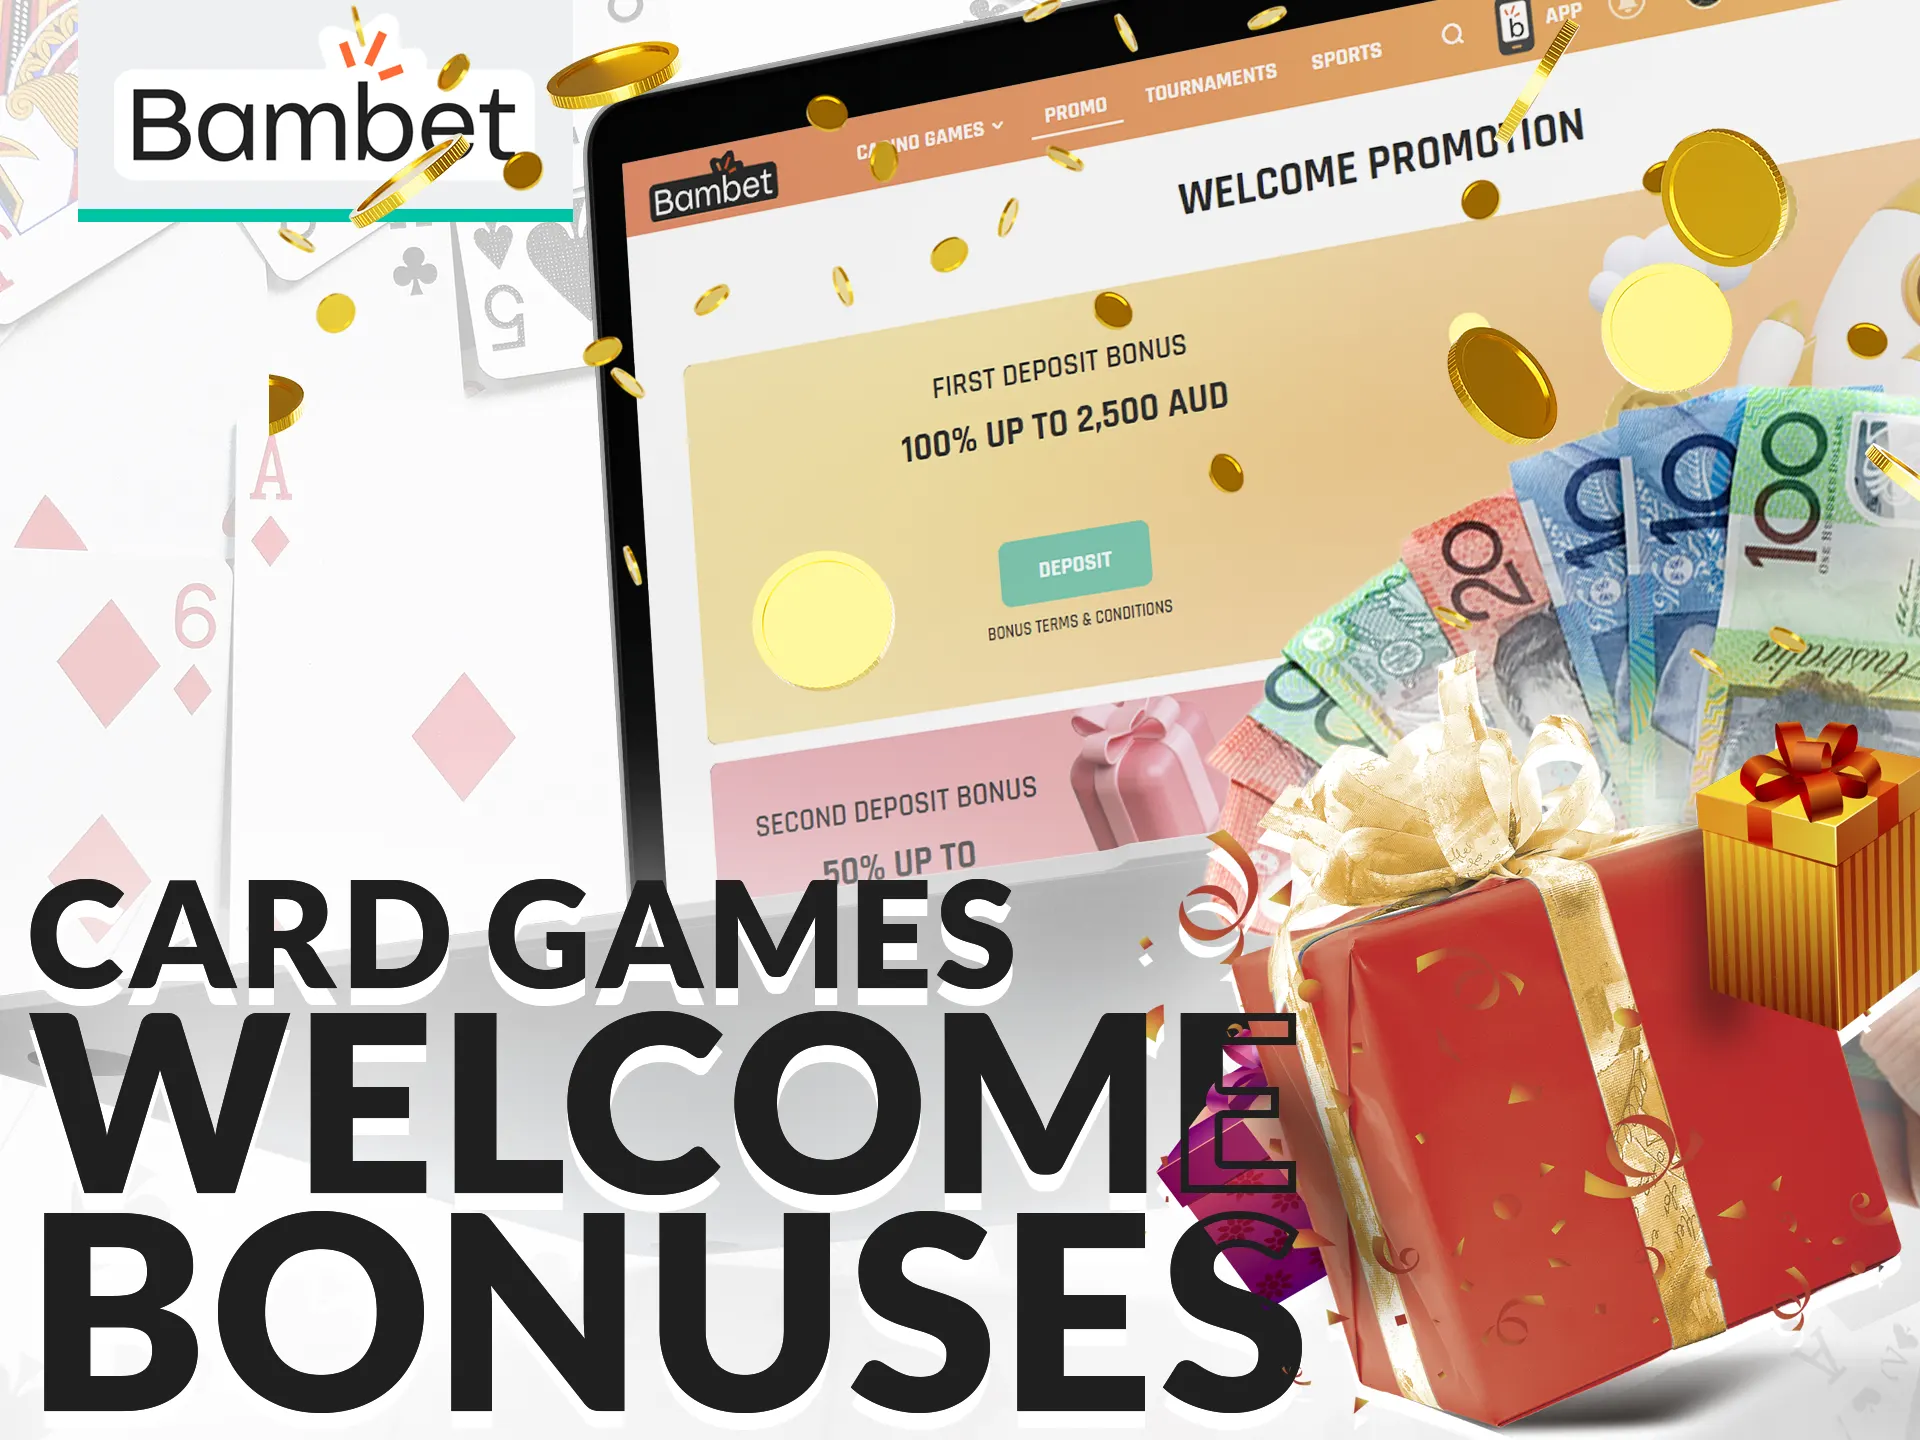 Play card games and get welcome bonuses on the Bambet website.